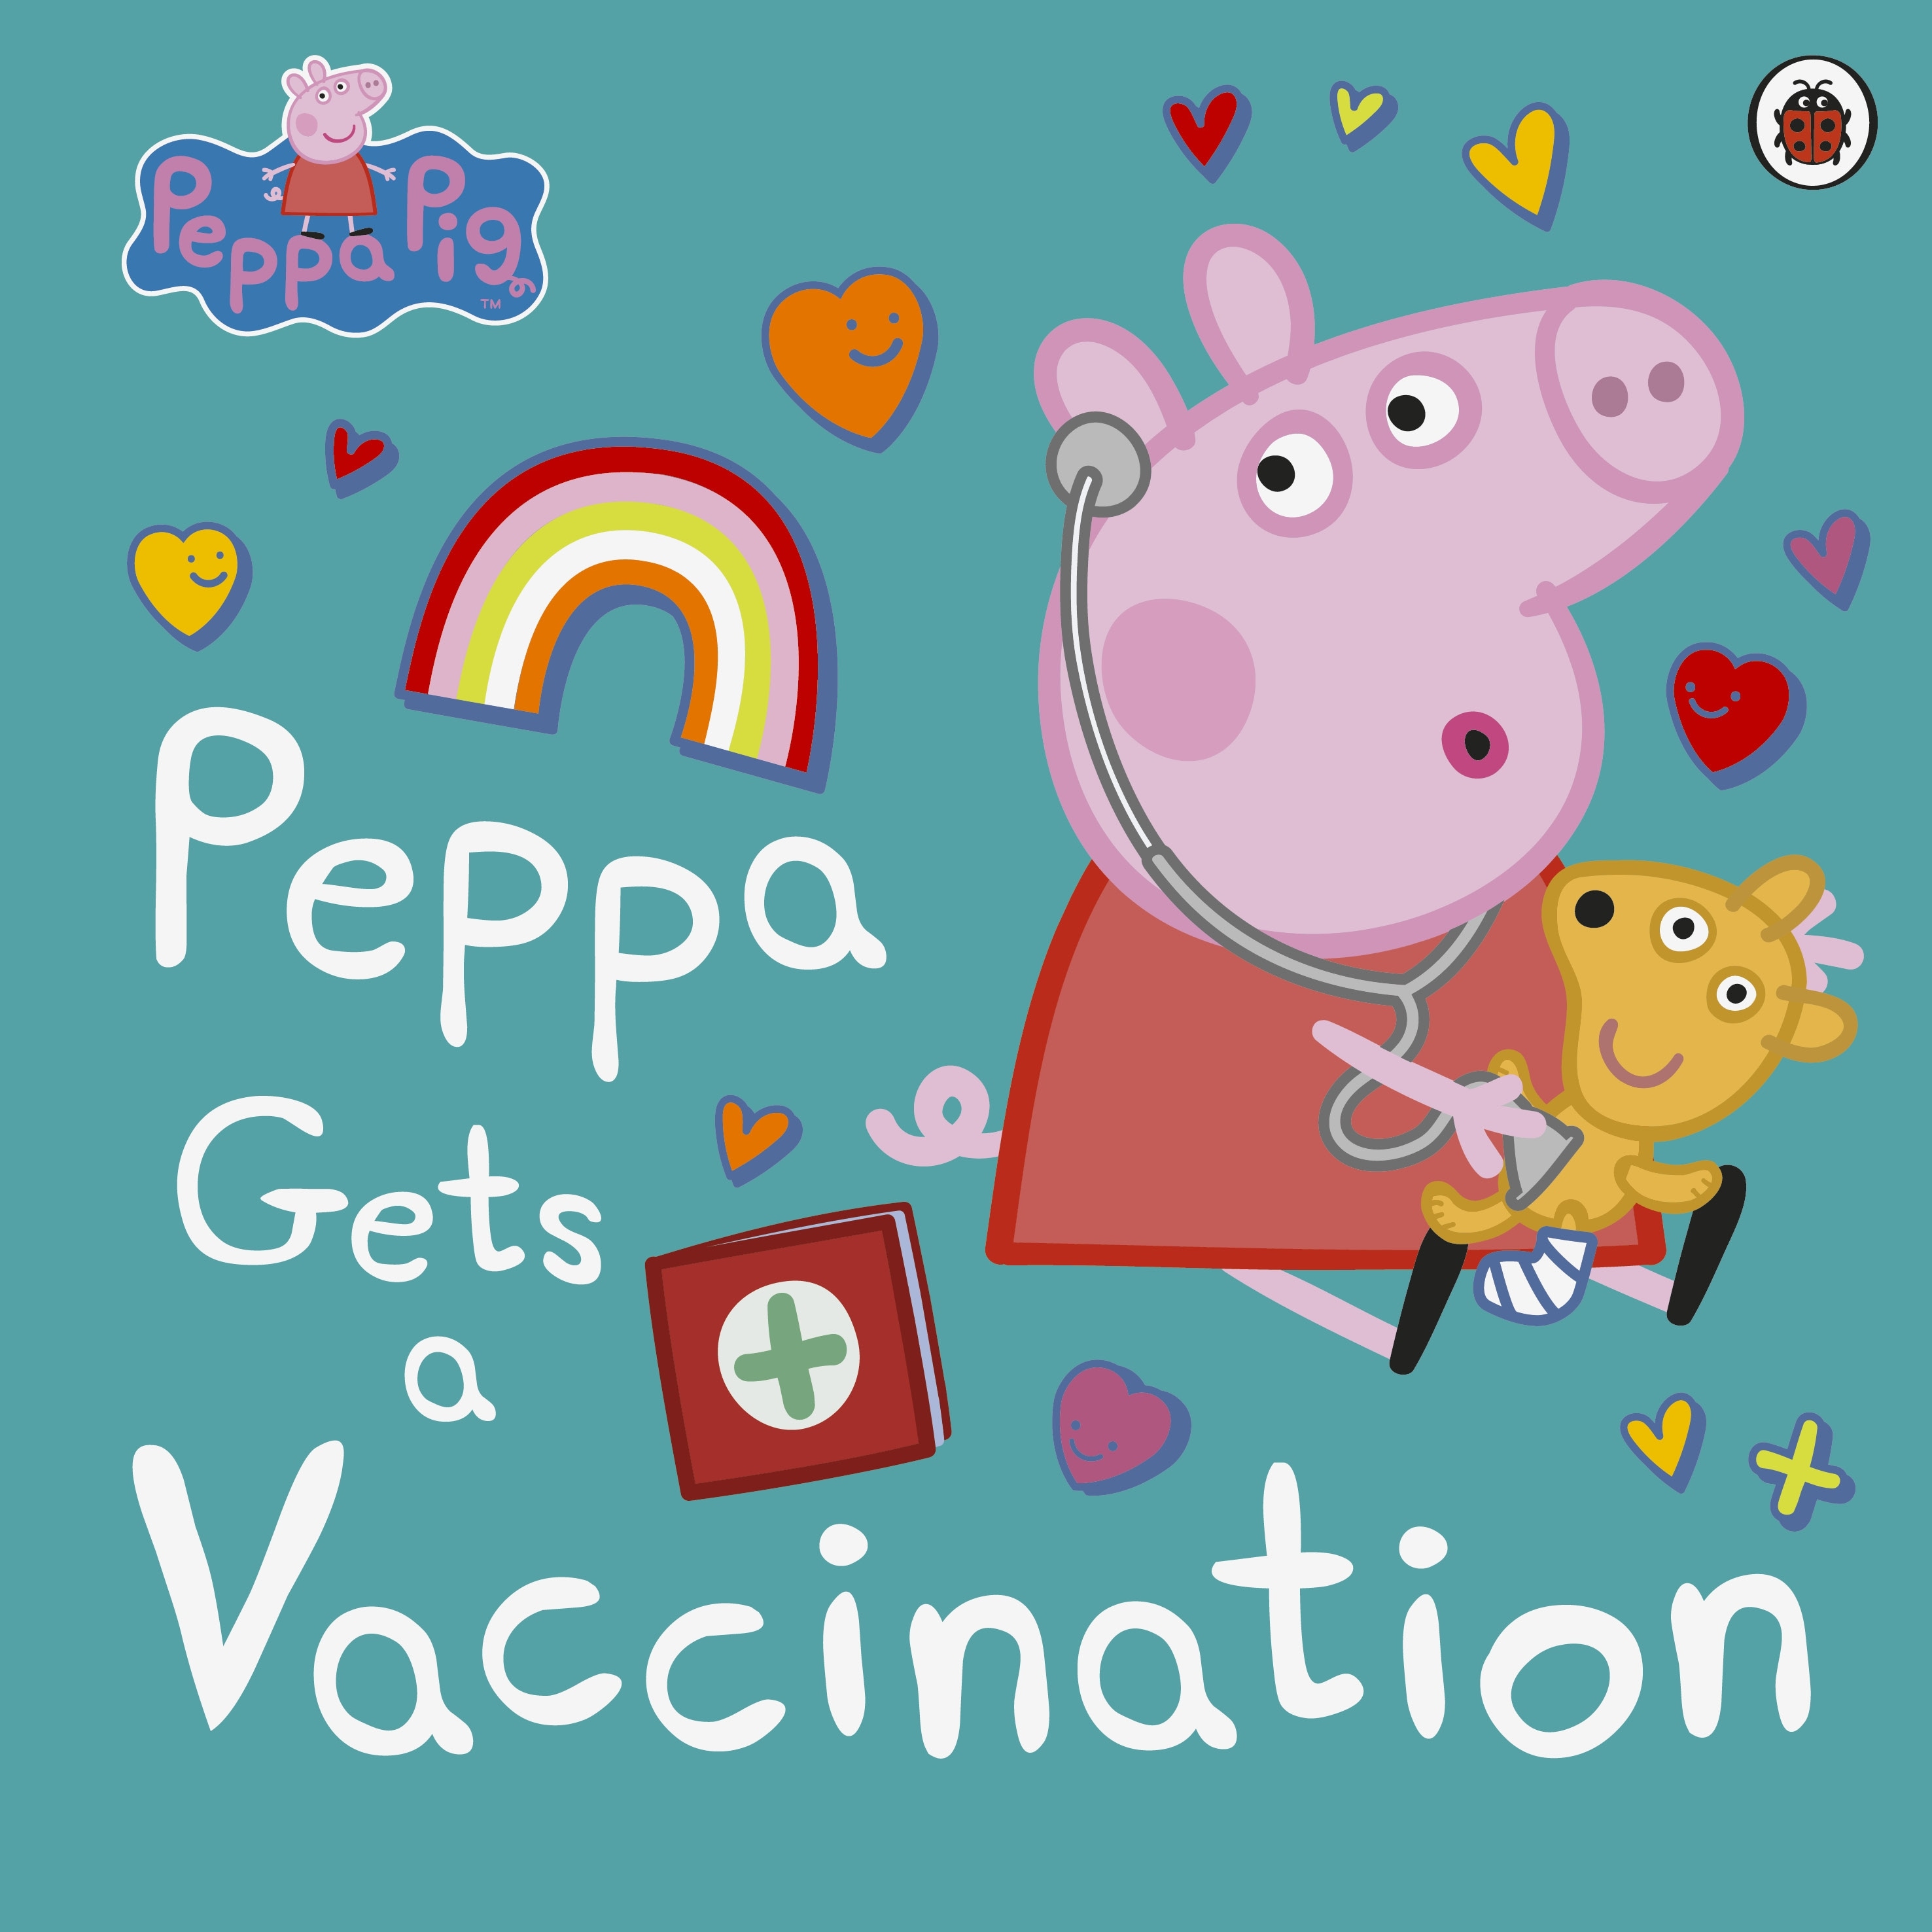 Book “Peppa Pig: Peppa Gets a Vaccination” by Peppa Pig — September 30, 2021